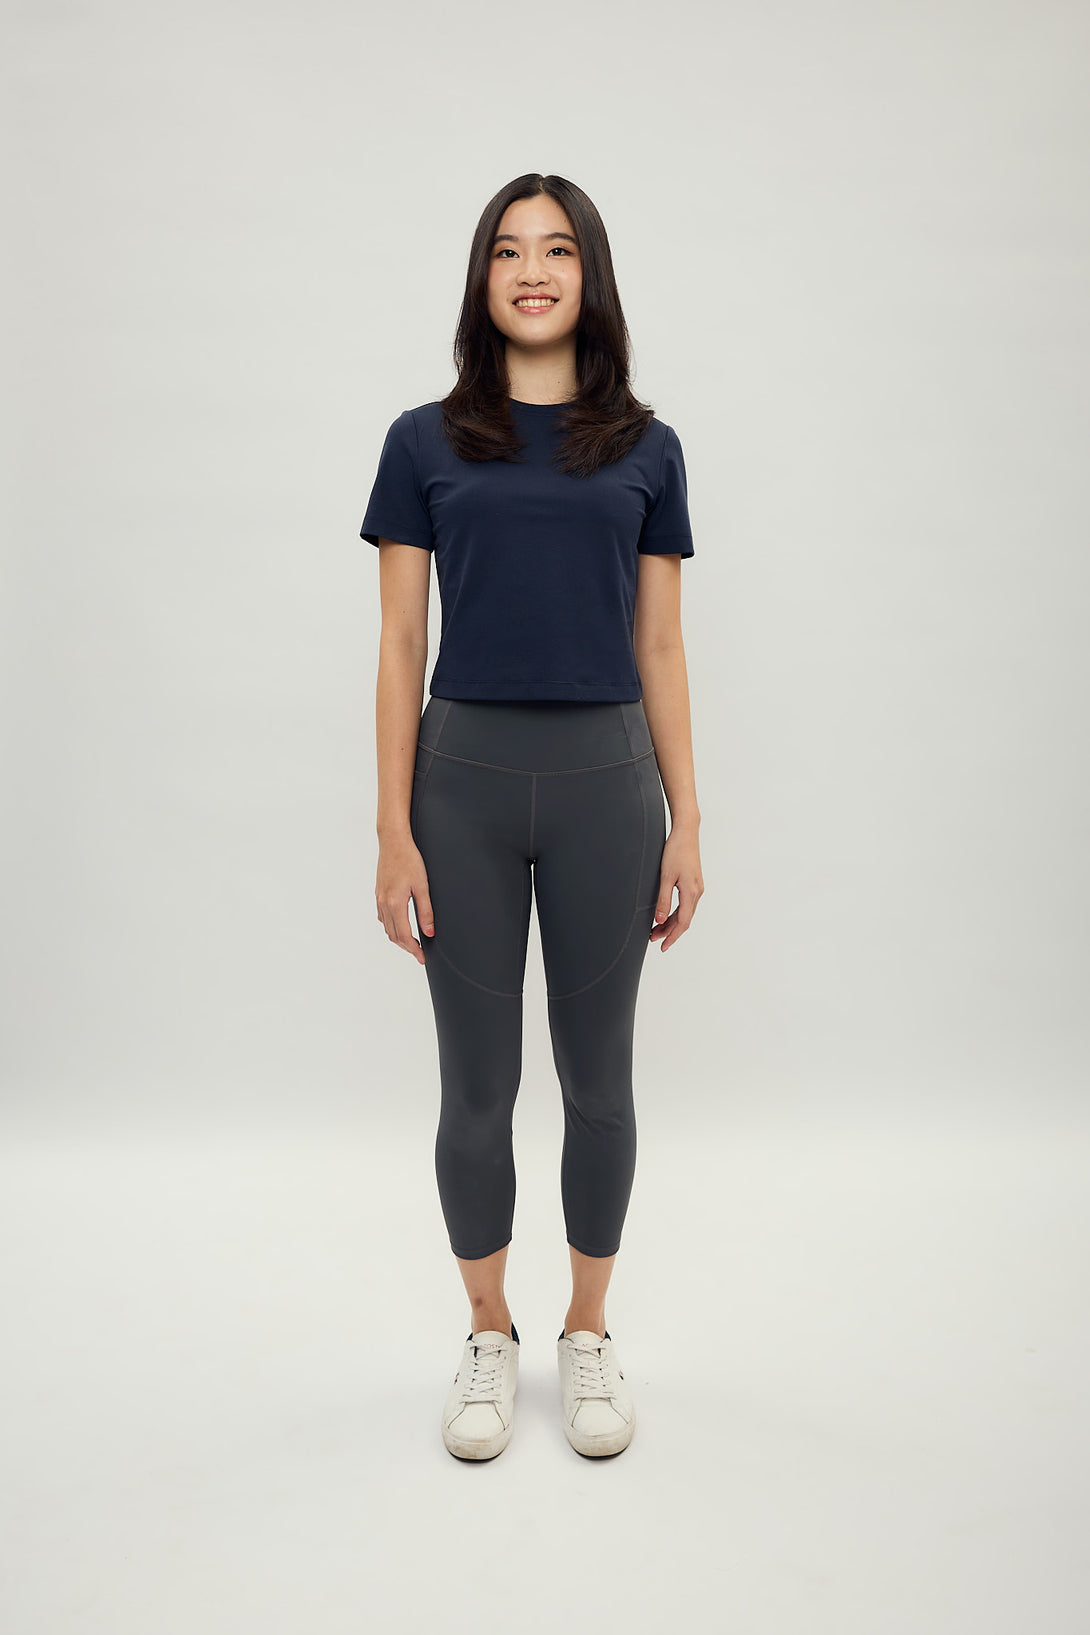 All Day Stretch Cropped Tee product image 2